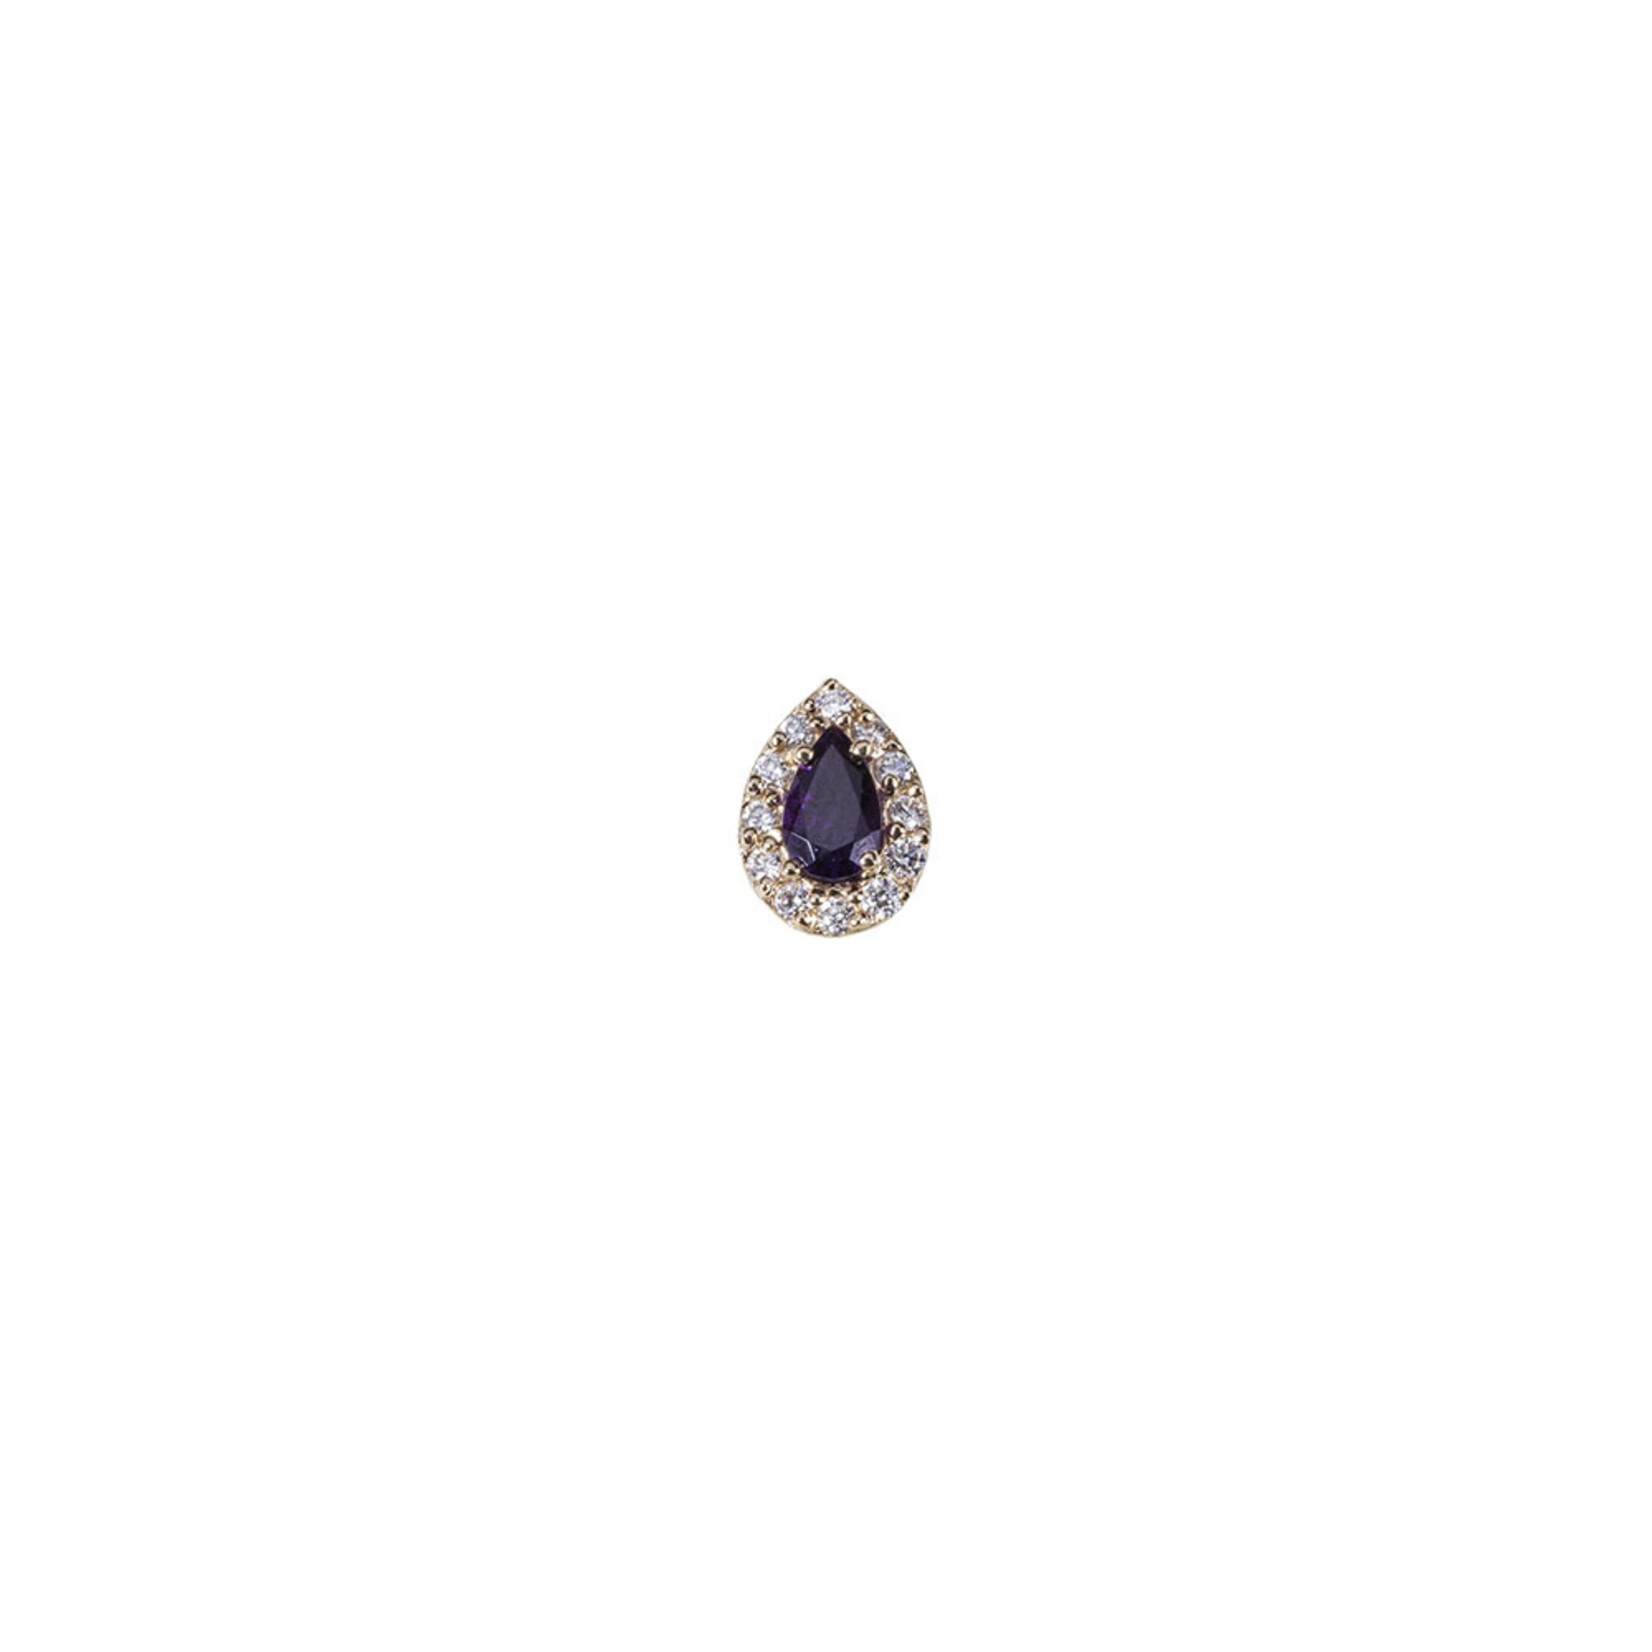 BVLA BVLA "Pear Altura" threaded end with 12x 1.0 VS1 diamond and 4x2.5 AA Amethyst pear